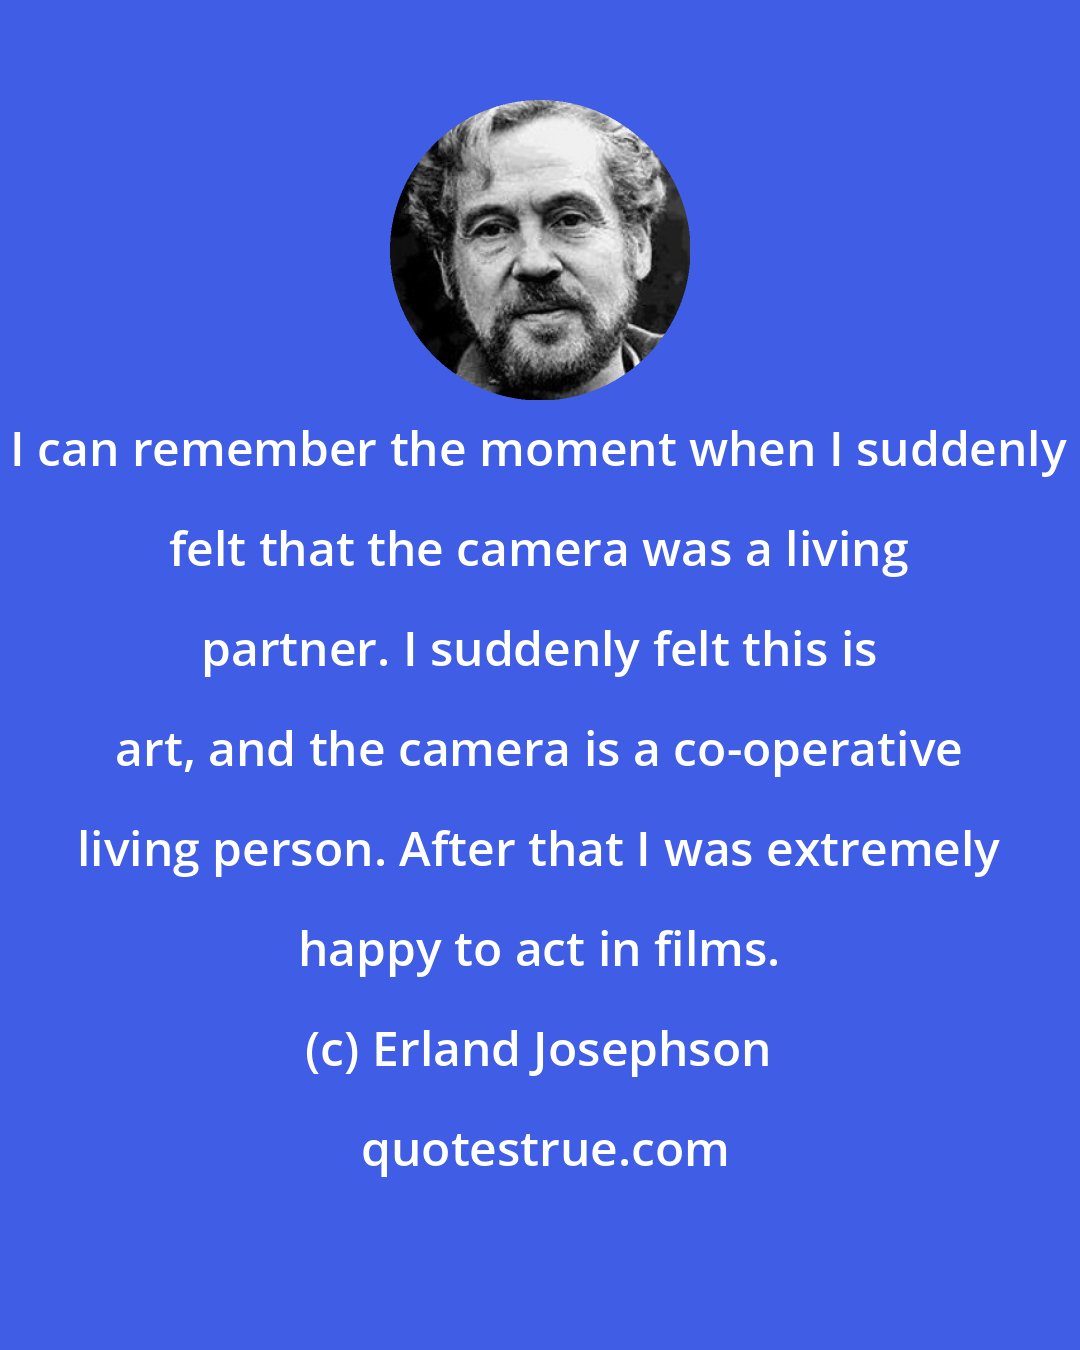 Erland Josephson: I can remember the moment when I suddenly felt that the camera was a living partner. I suddenly felt this is art, and the camera is a co-operative living person. After that I was extremely happy to act in films.